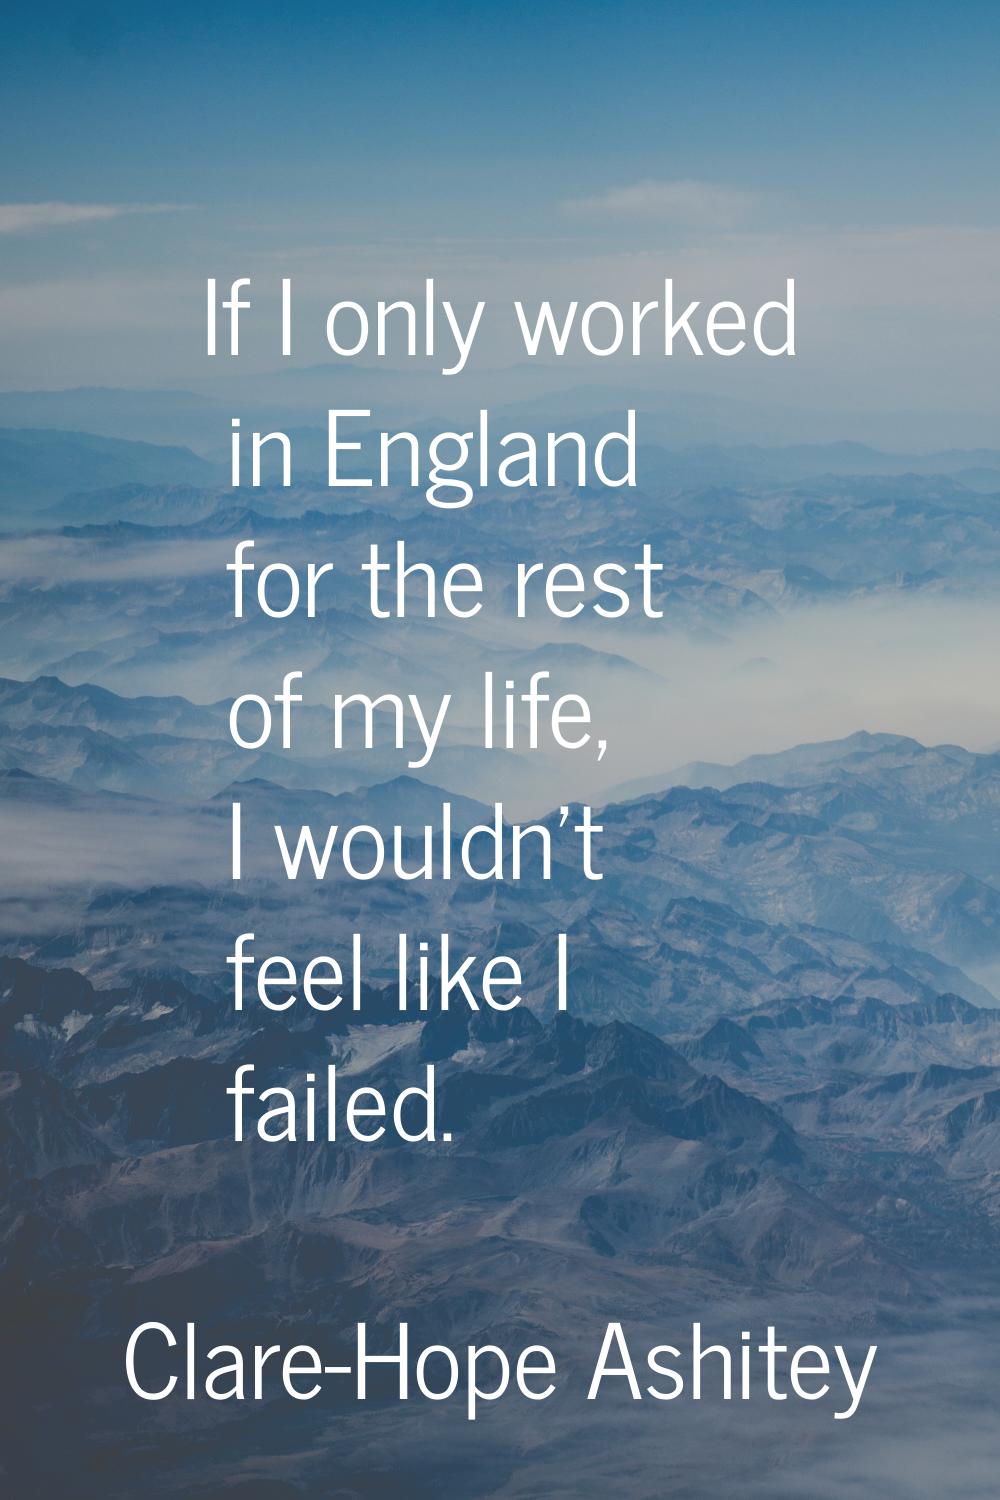 If I only worked in England for the rest of my life, I wouldn't feel like I failed.